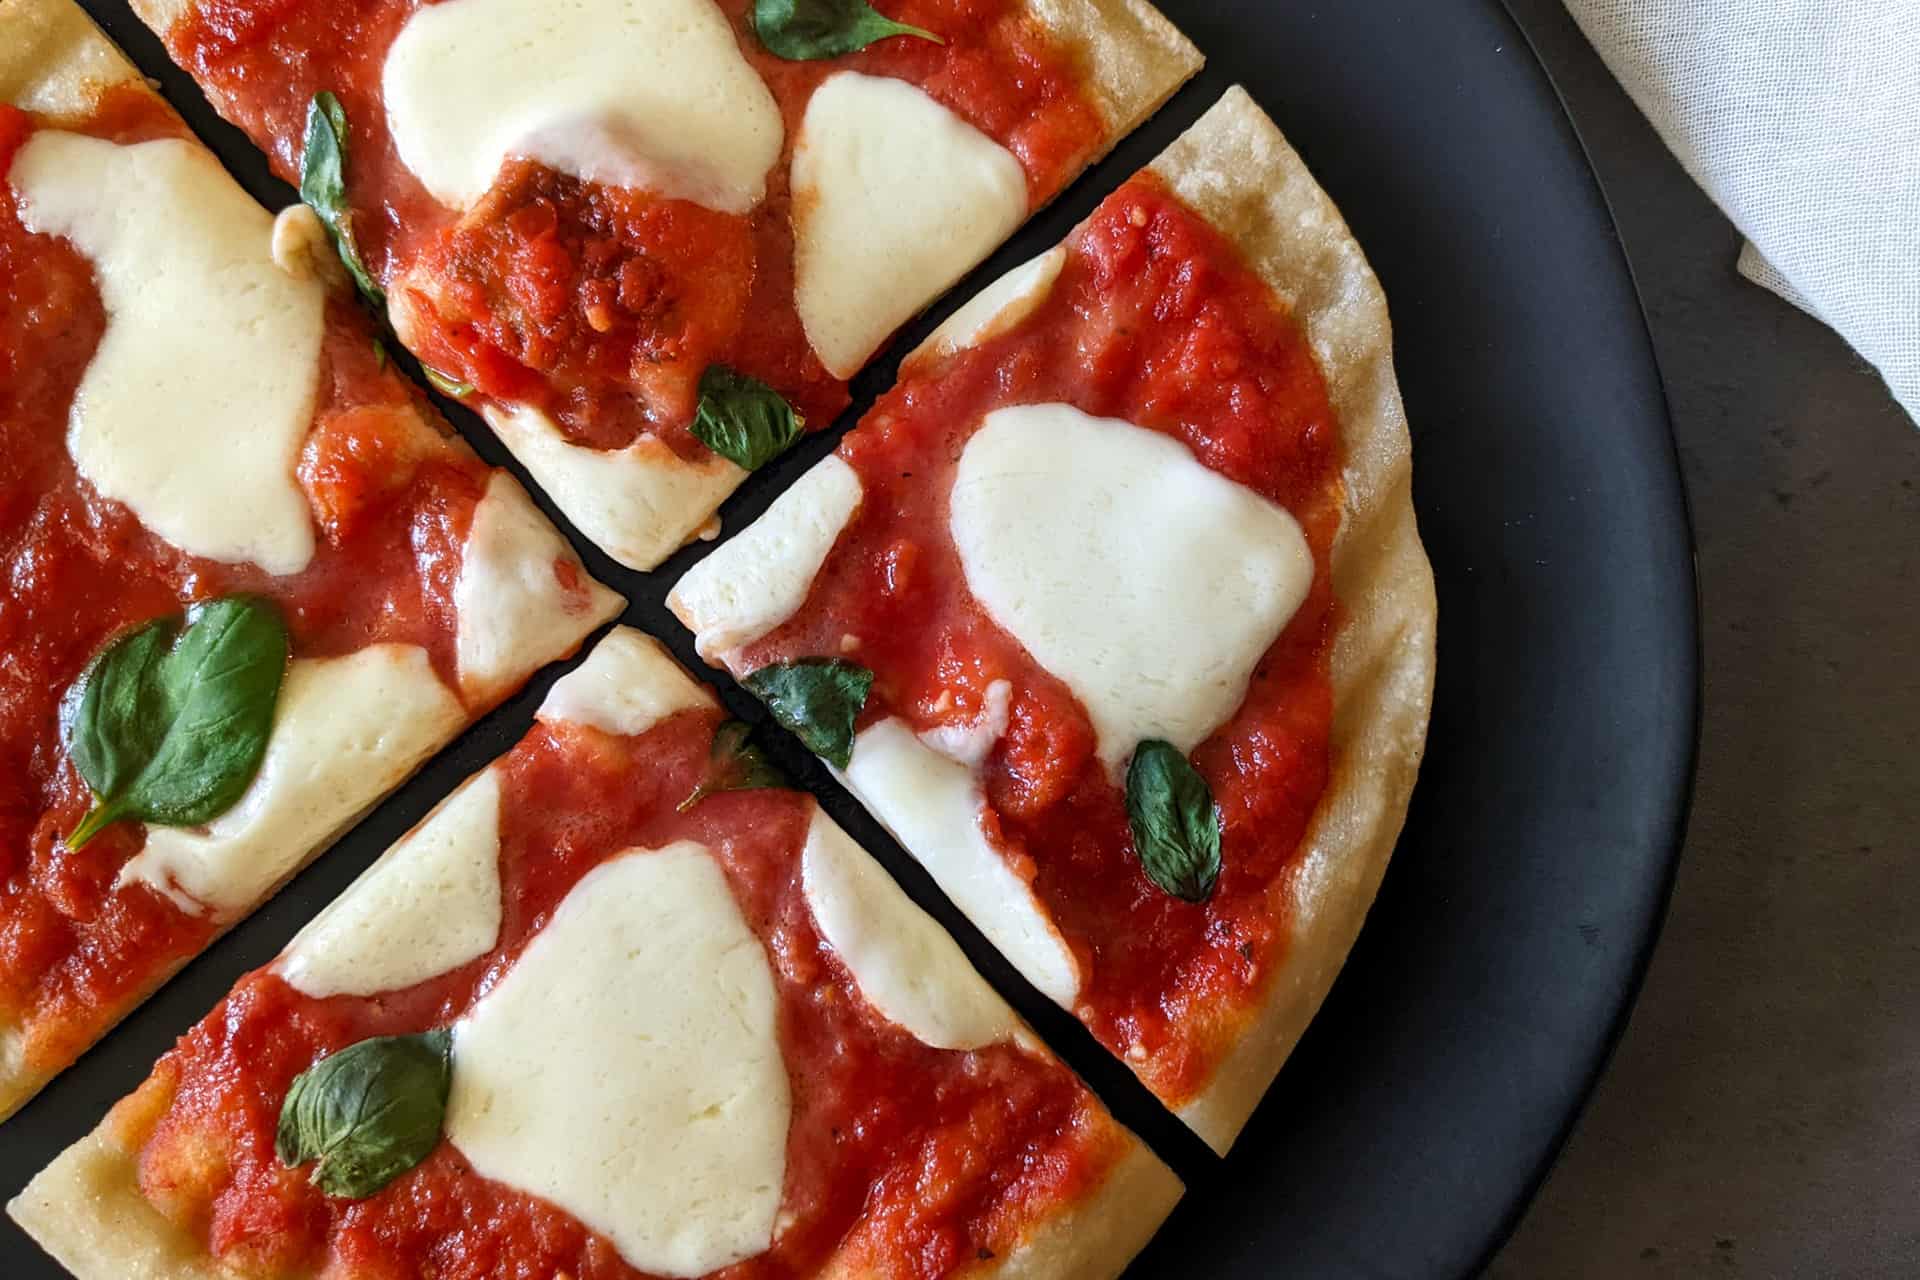 A grilled margherita pizza with fresh mozzarella and basil